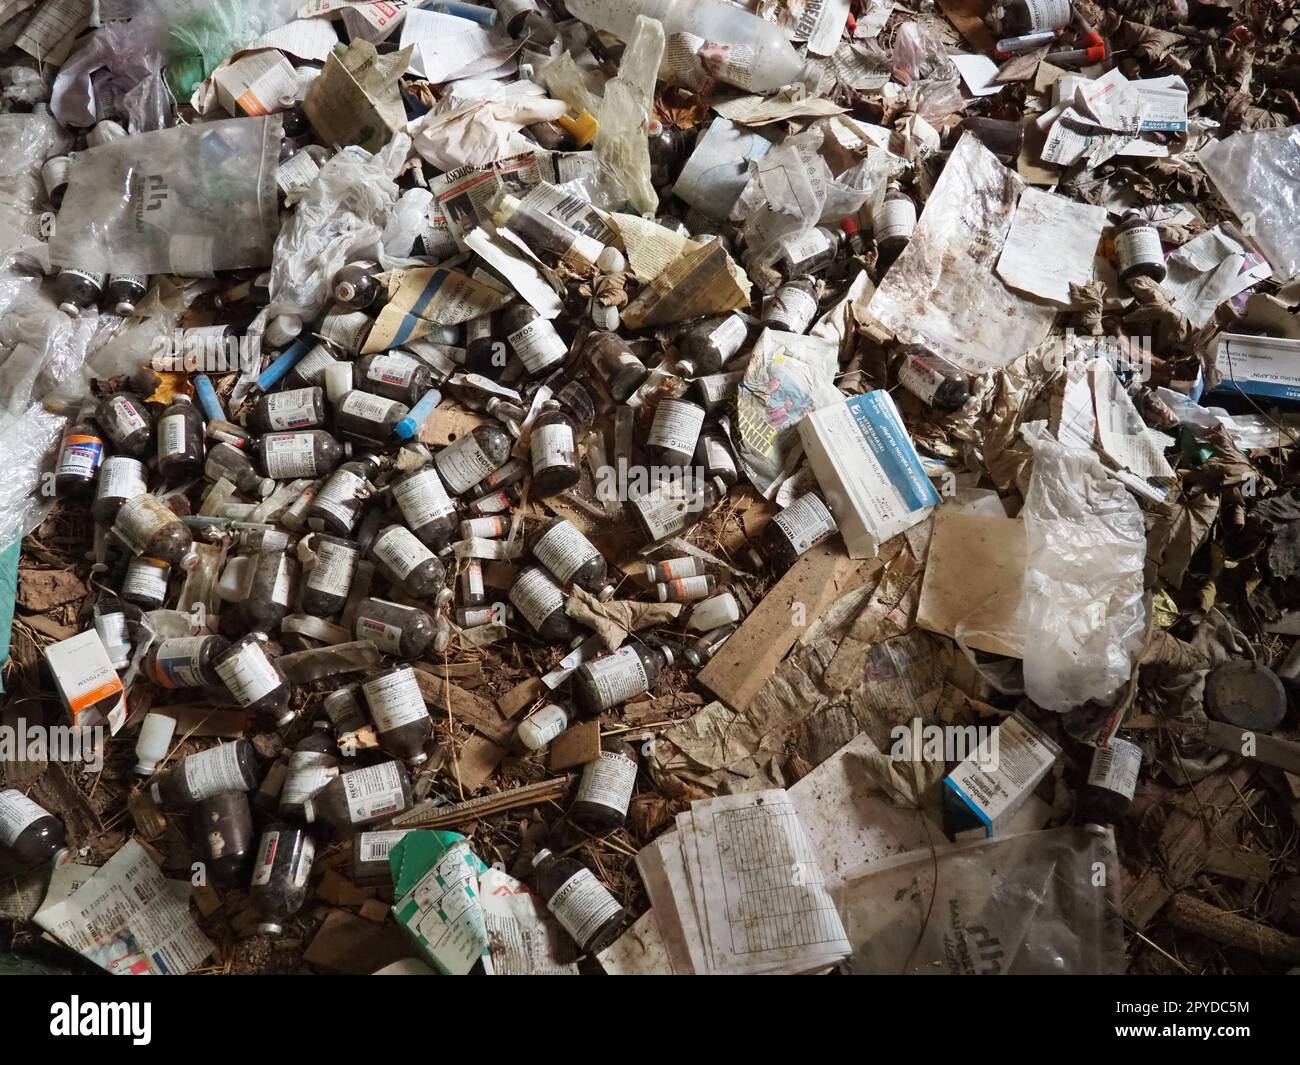 Sremska Mitrovica, Serbia. 07 February 2021, Room with trash in an abandoned house. Packages, paper, plastic items, medicines, bottles, packages, syringes on a wooden floor. Stock Photo